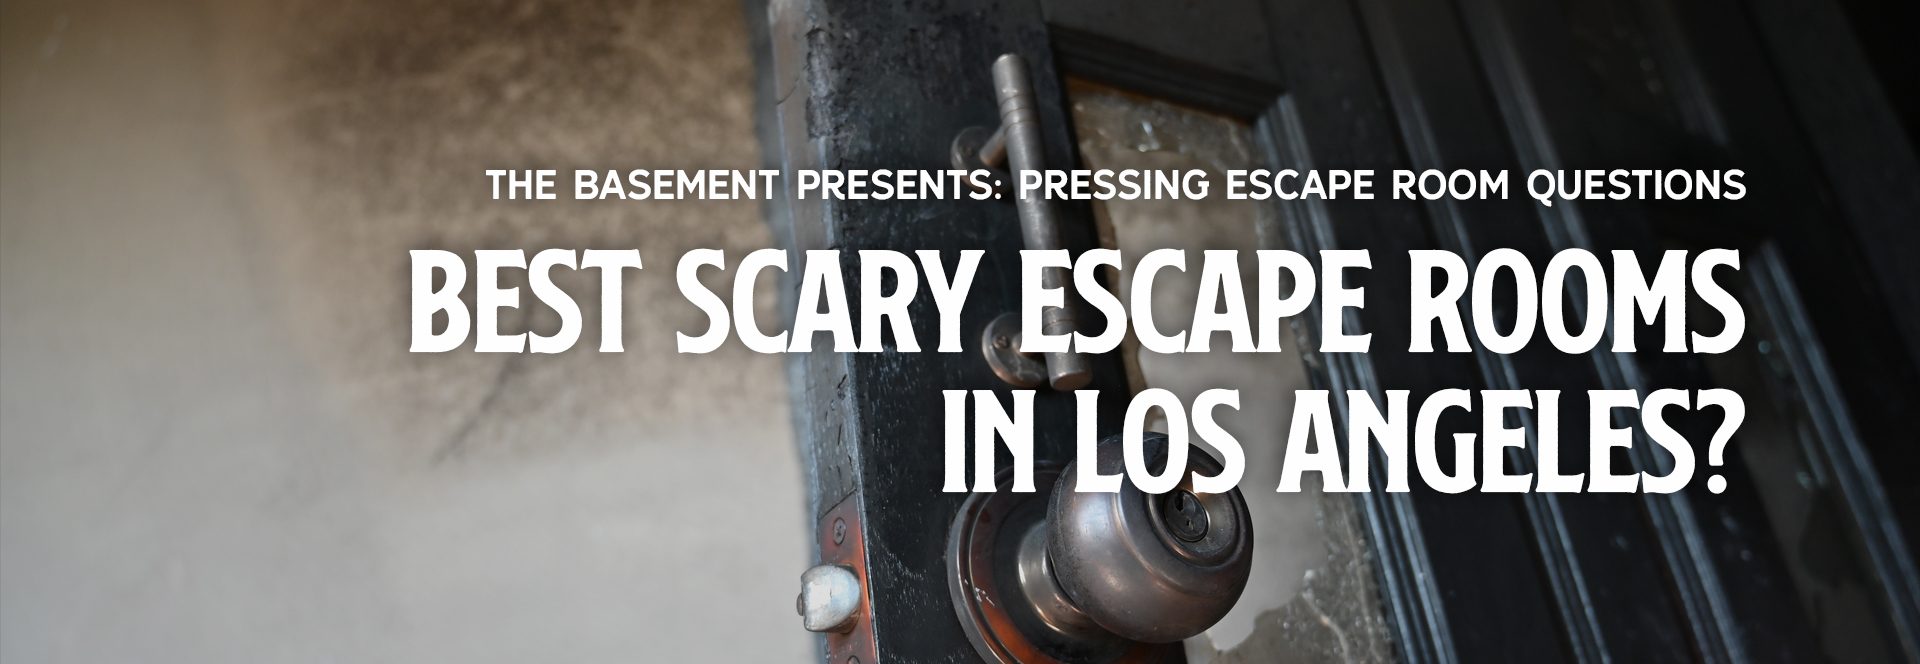 What Are The Best Scary Escape Rooms in Los Angeles?